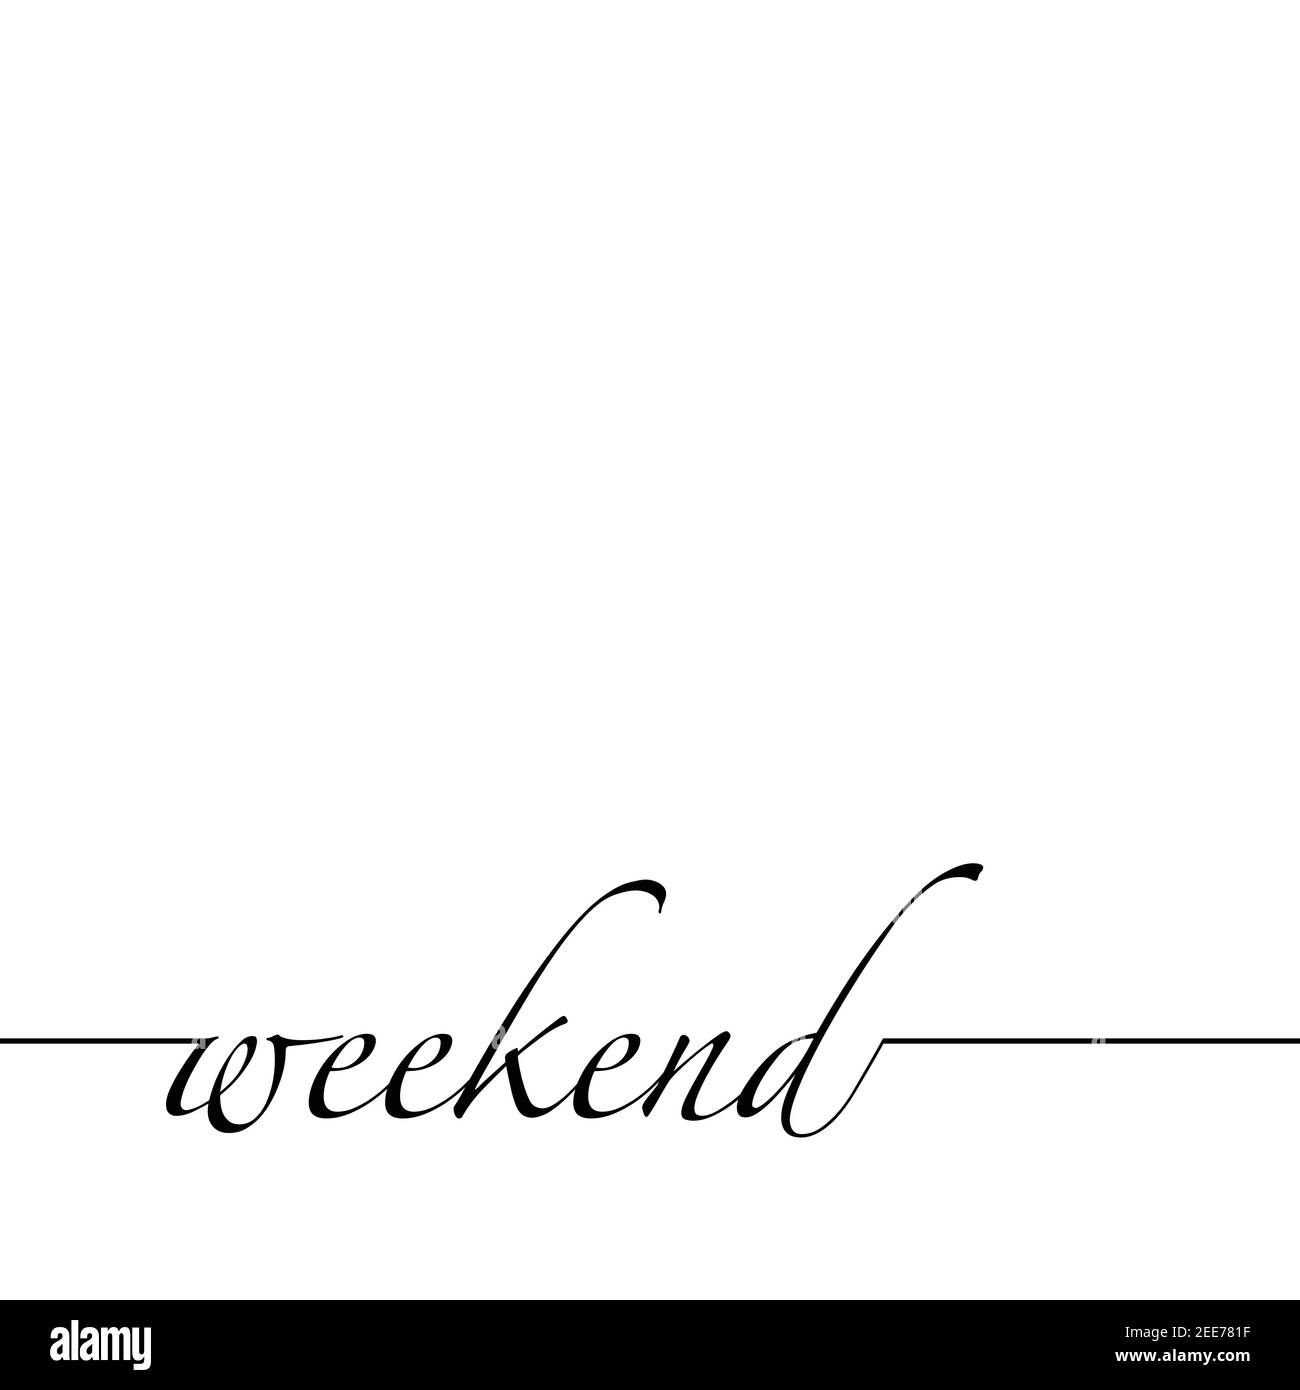 Weekend text background Stock Vector